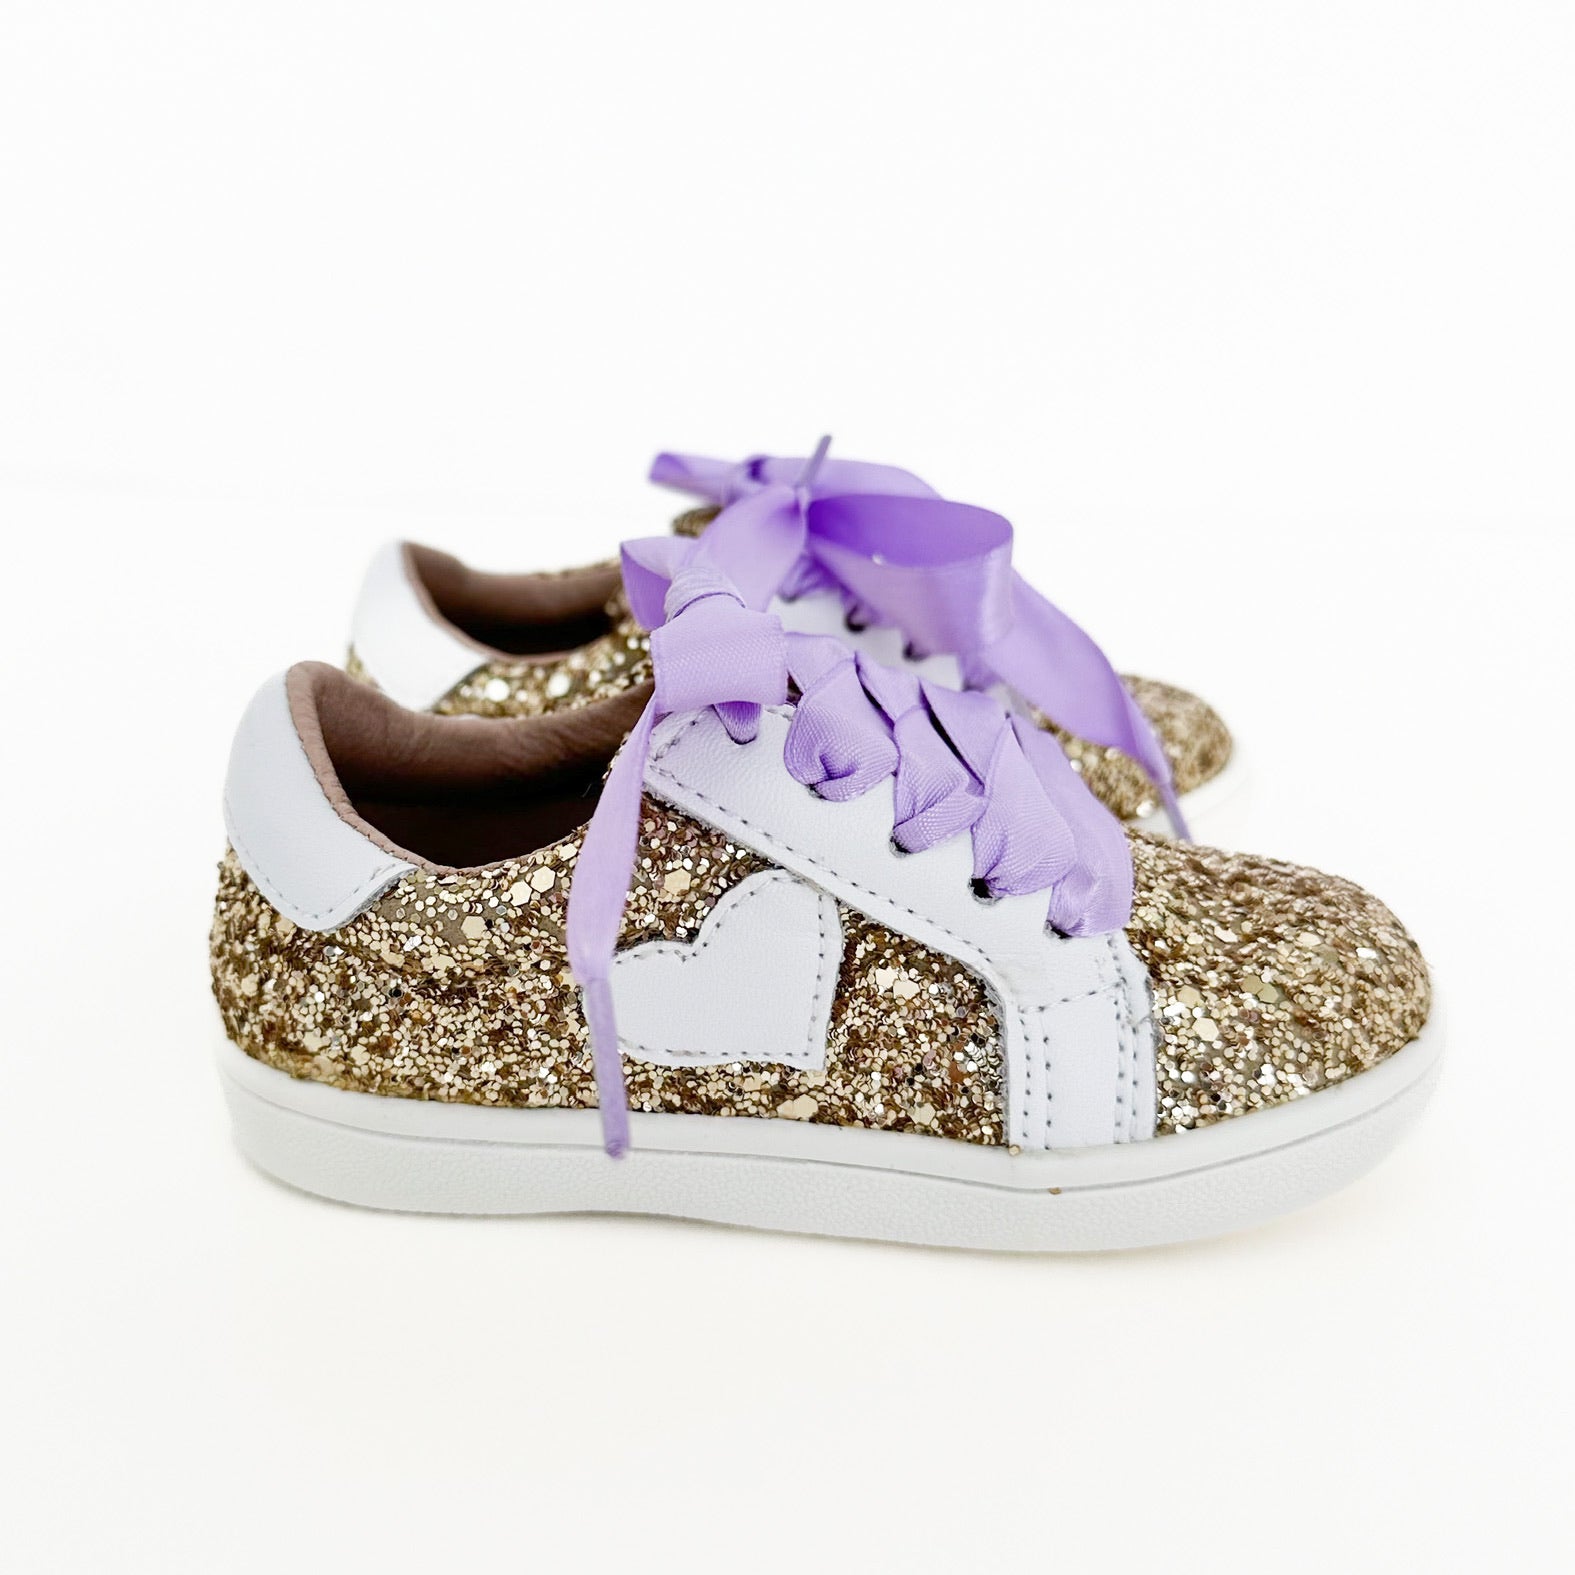 Gold Glitter Sneakers - Love and Grow Clothing Co